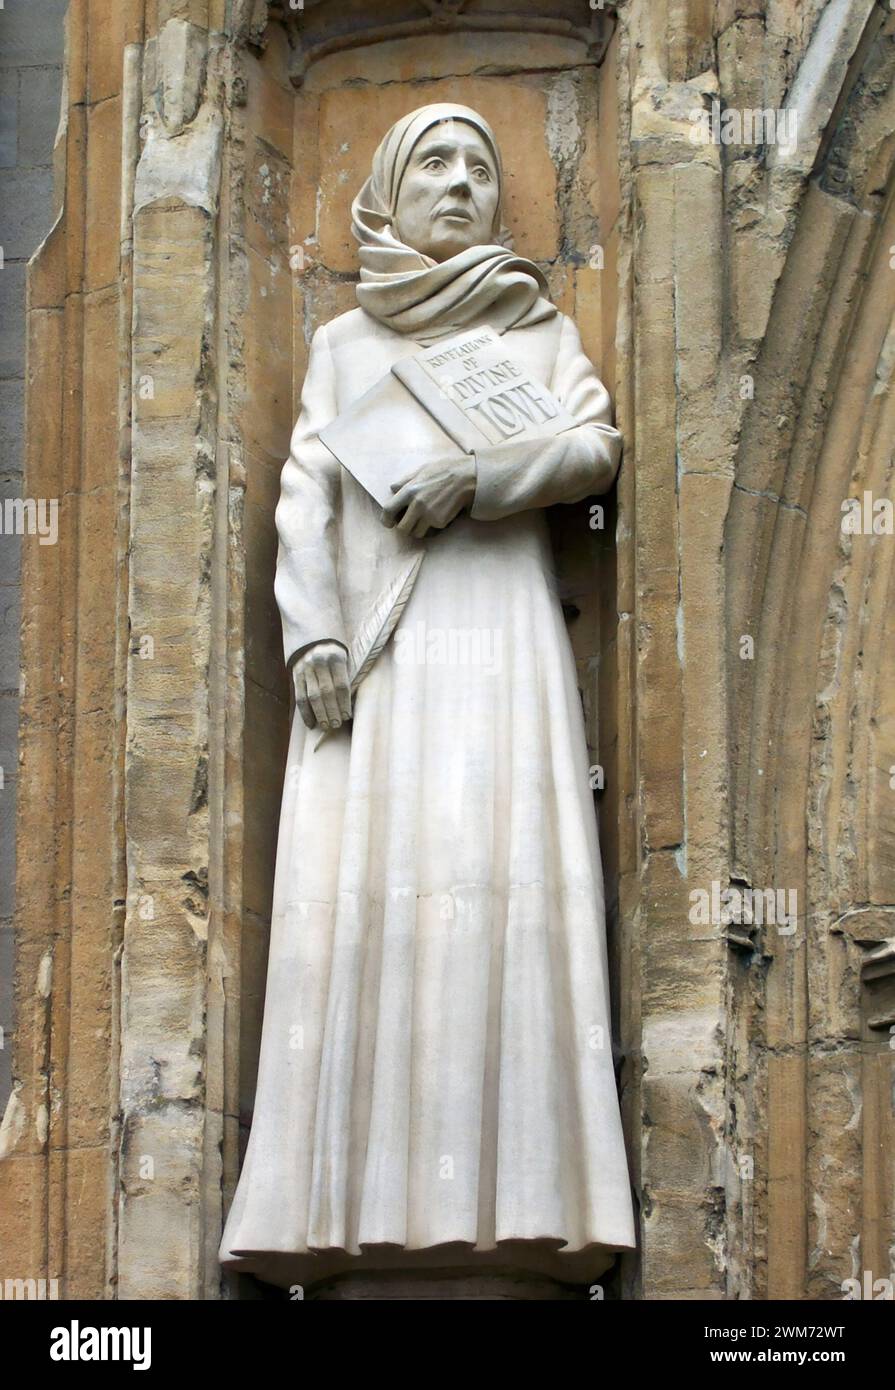 Julian of Norwich. Statue of Julian of Norwich (c. 1343- after 1416), also known as Juliana of Norwich, the Lady Julian, Dame Julian or Mother Julian, was an English anchoress of the Middle Ages. Her writings, now known as Revelations of Divine Love, are the earliest surviving English language works by a woman (Wikipedia) Stock Photo